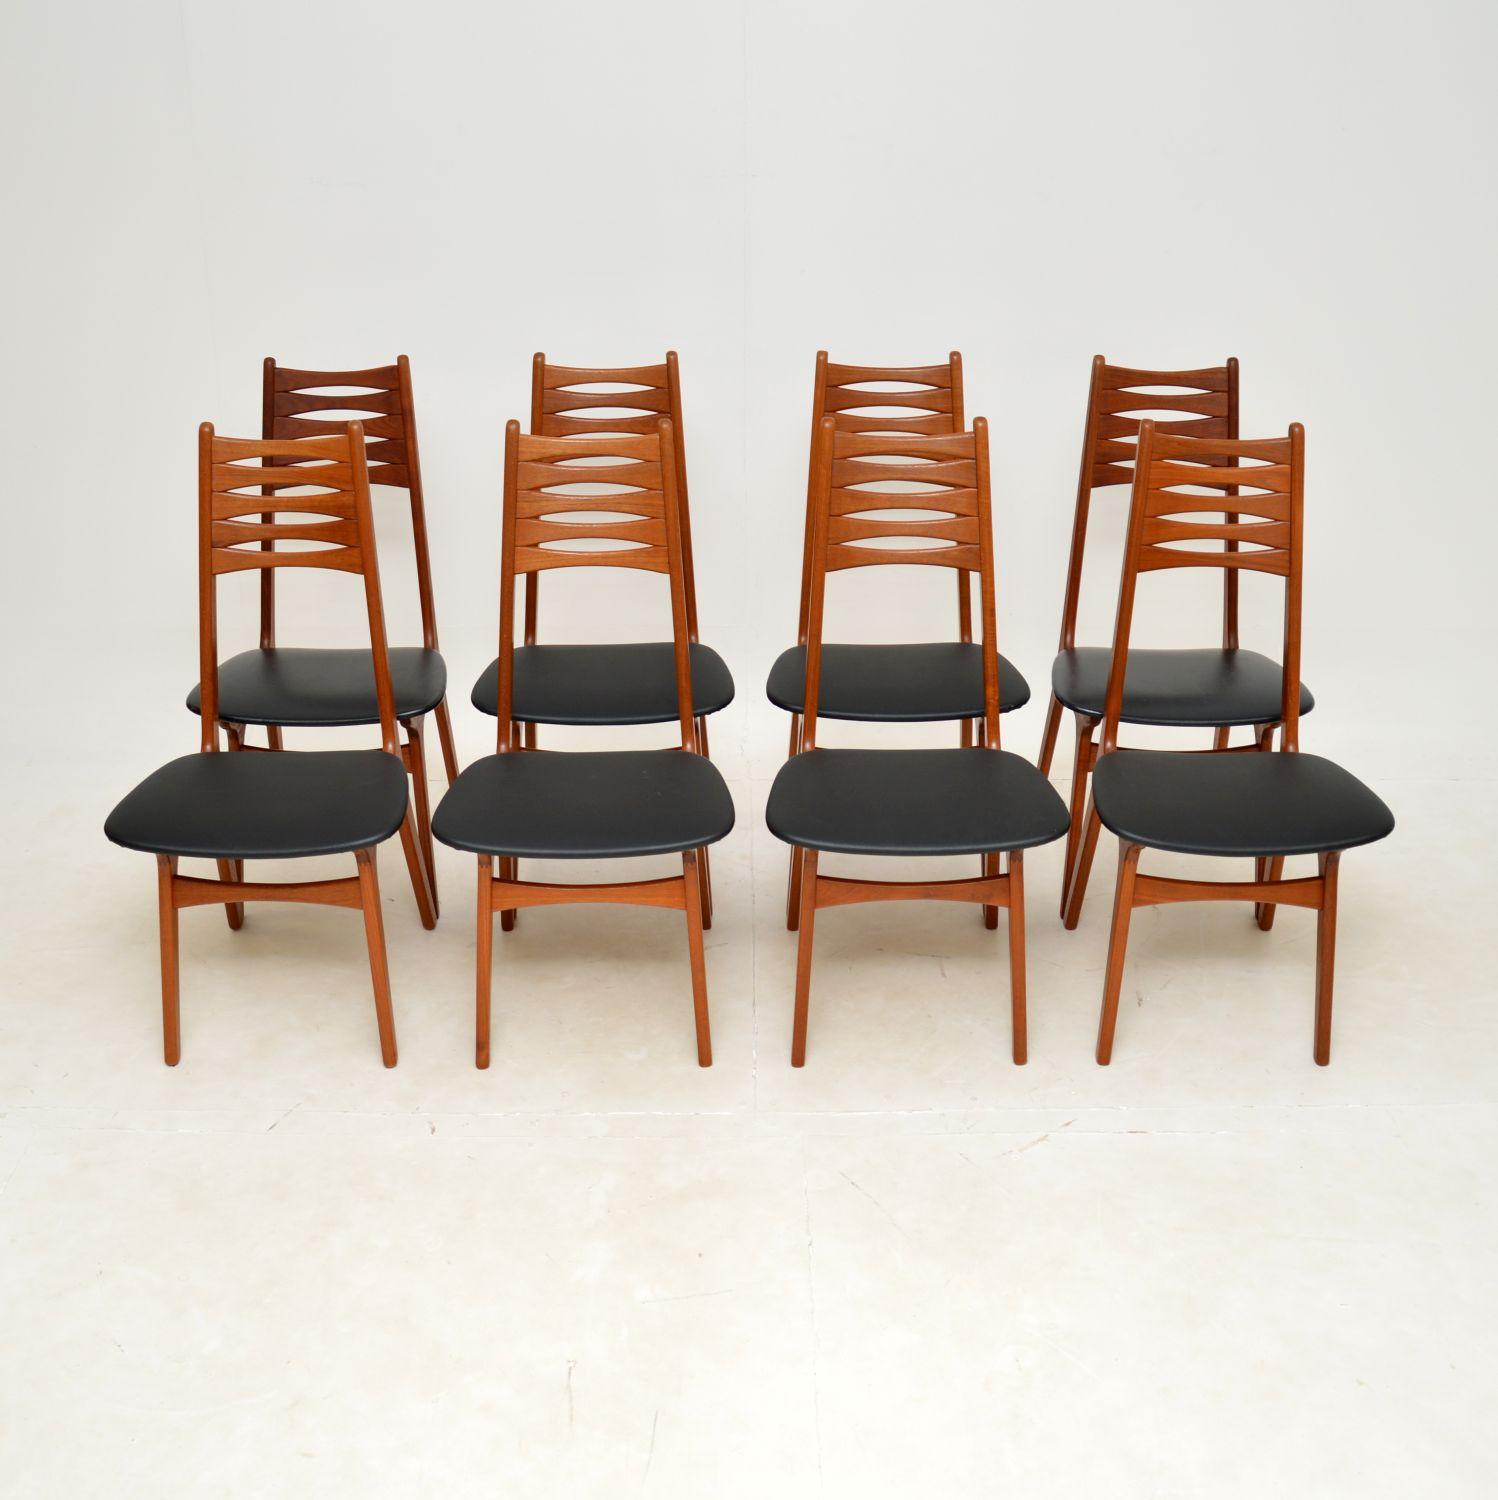 A very stylish and extremely well made set of eight vintage Danish dining chairs in solid teak. They were made in Denmark, and date from the 1960’s.

The quality is outstanding, they have a beautiful, sculptural design and look amazing from all